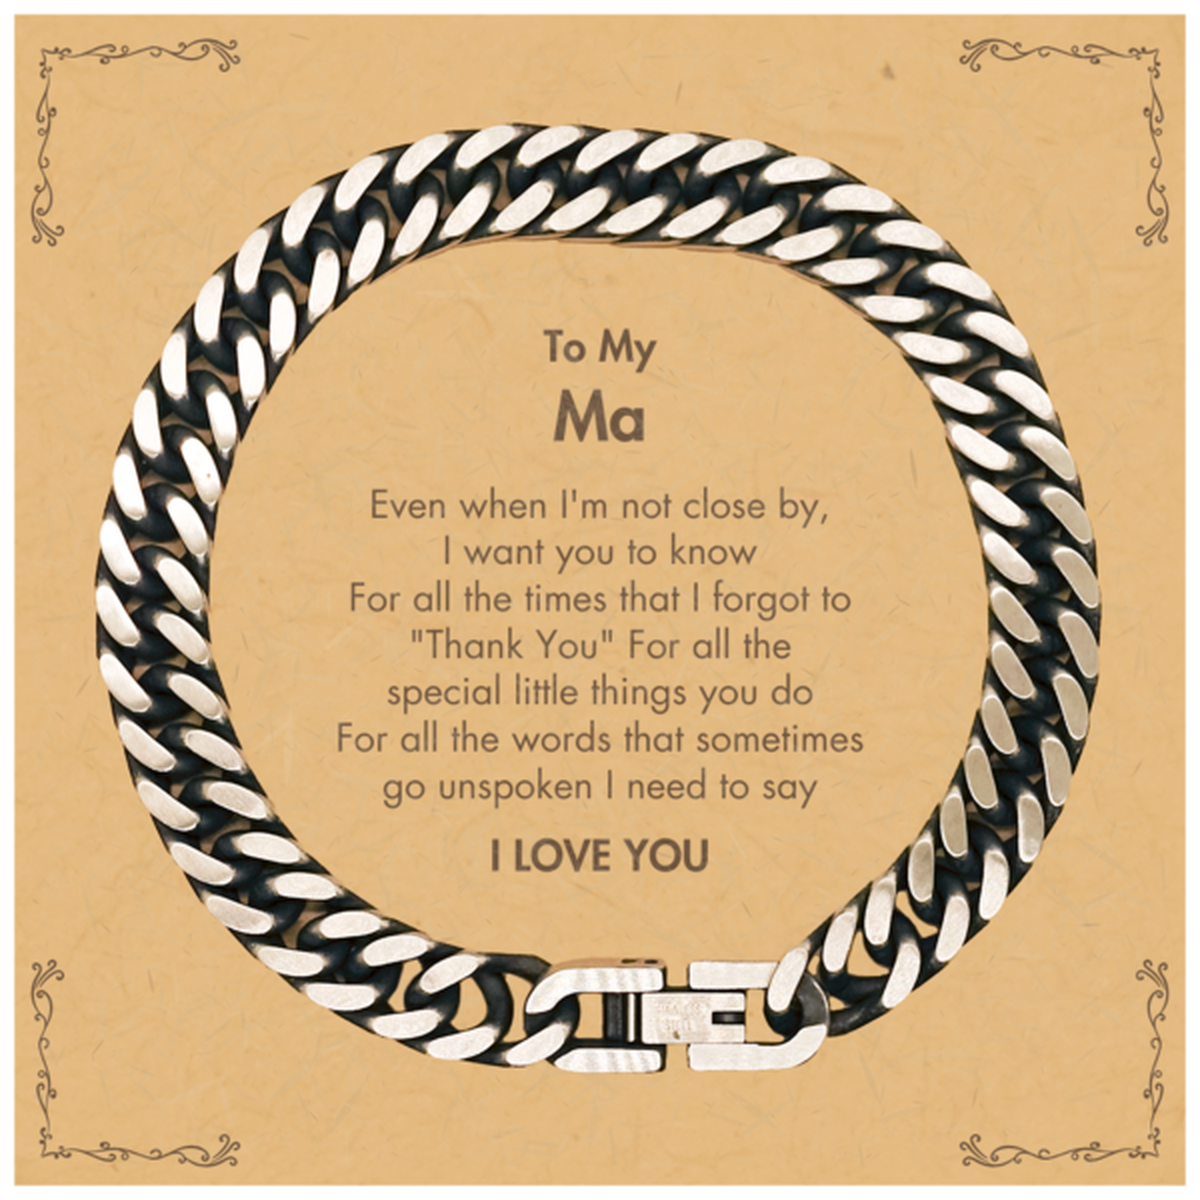 Thank You Gifts for Ma, Keepsake Cuban Link Chain Bracelet Gifts for Ma Birthday Mother's day Father's Day Ma For all the words That sometimes go unspoken I need to say I LOVE YOU